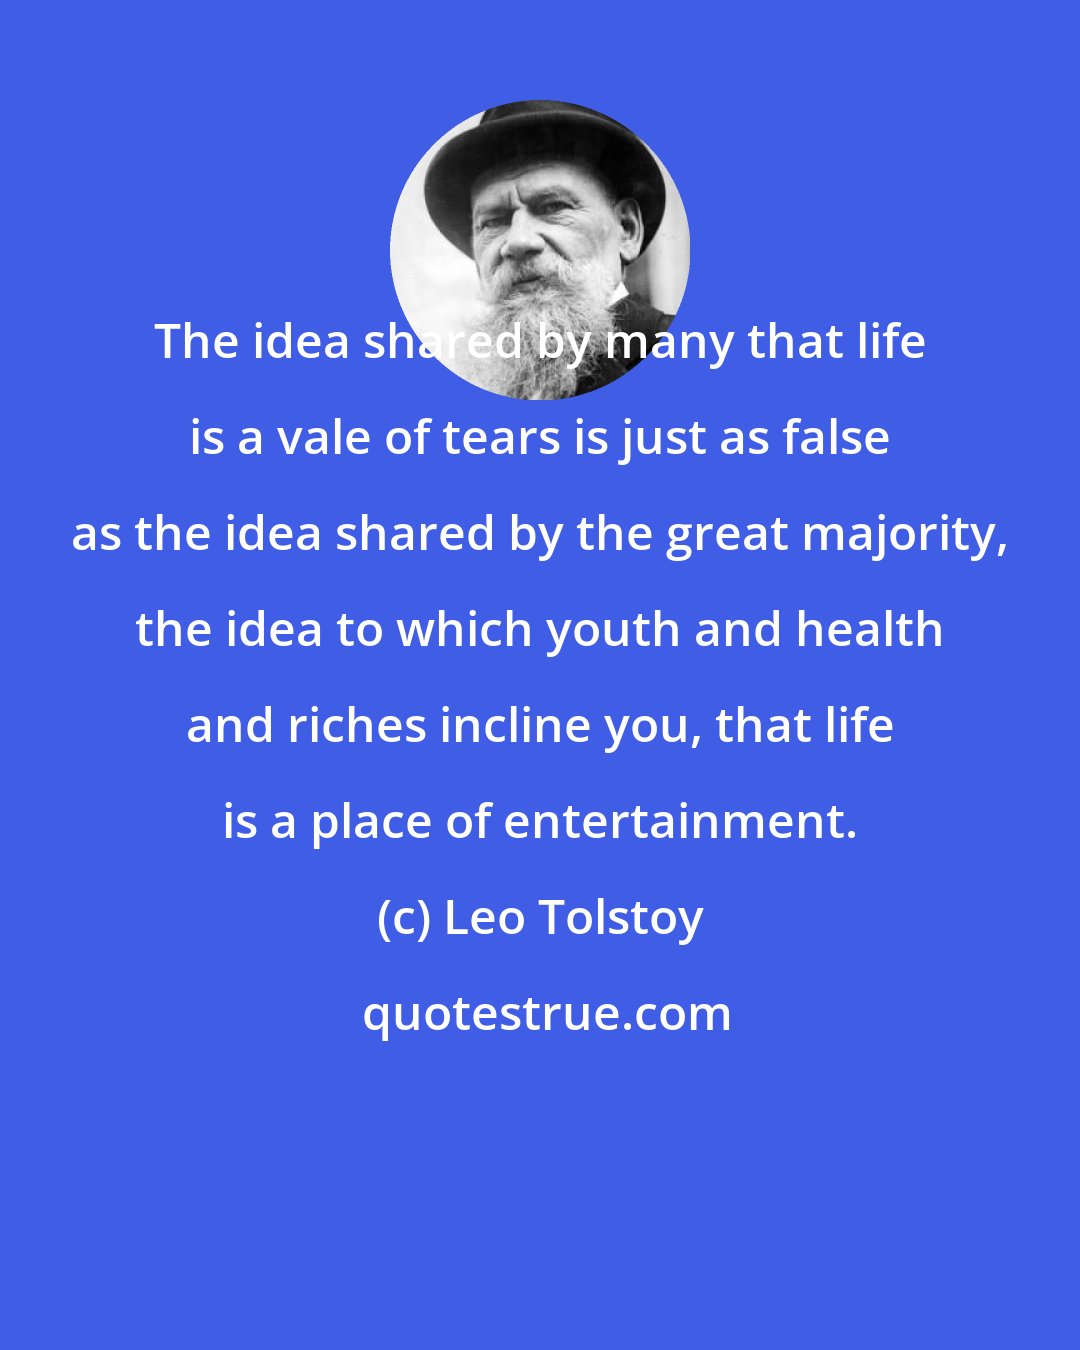 Leo Tolstoy: The idea shared by many that life is a vale of tears is just as false as the idea shared by the great majority, the idea to which youth and health and riches incline you, that life is a place of entertainment.